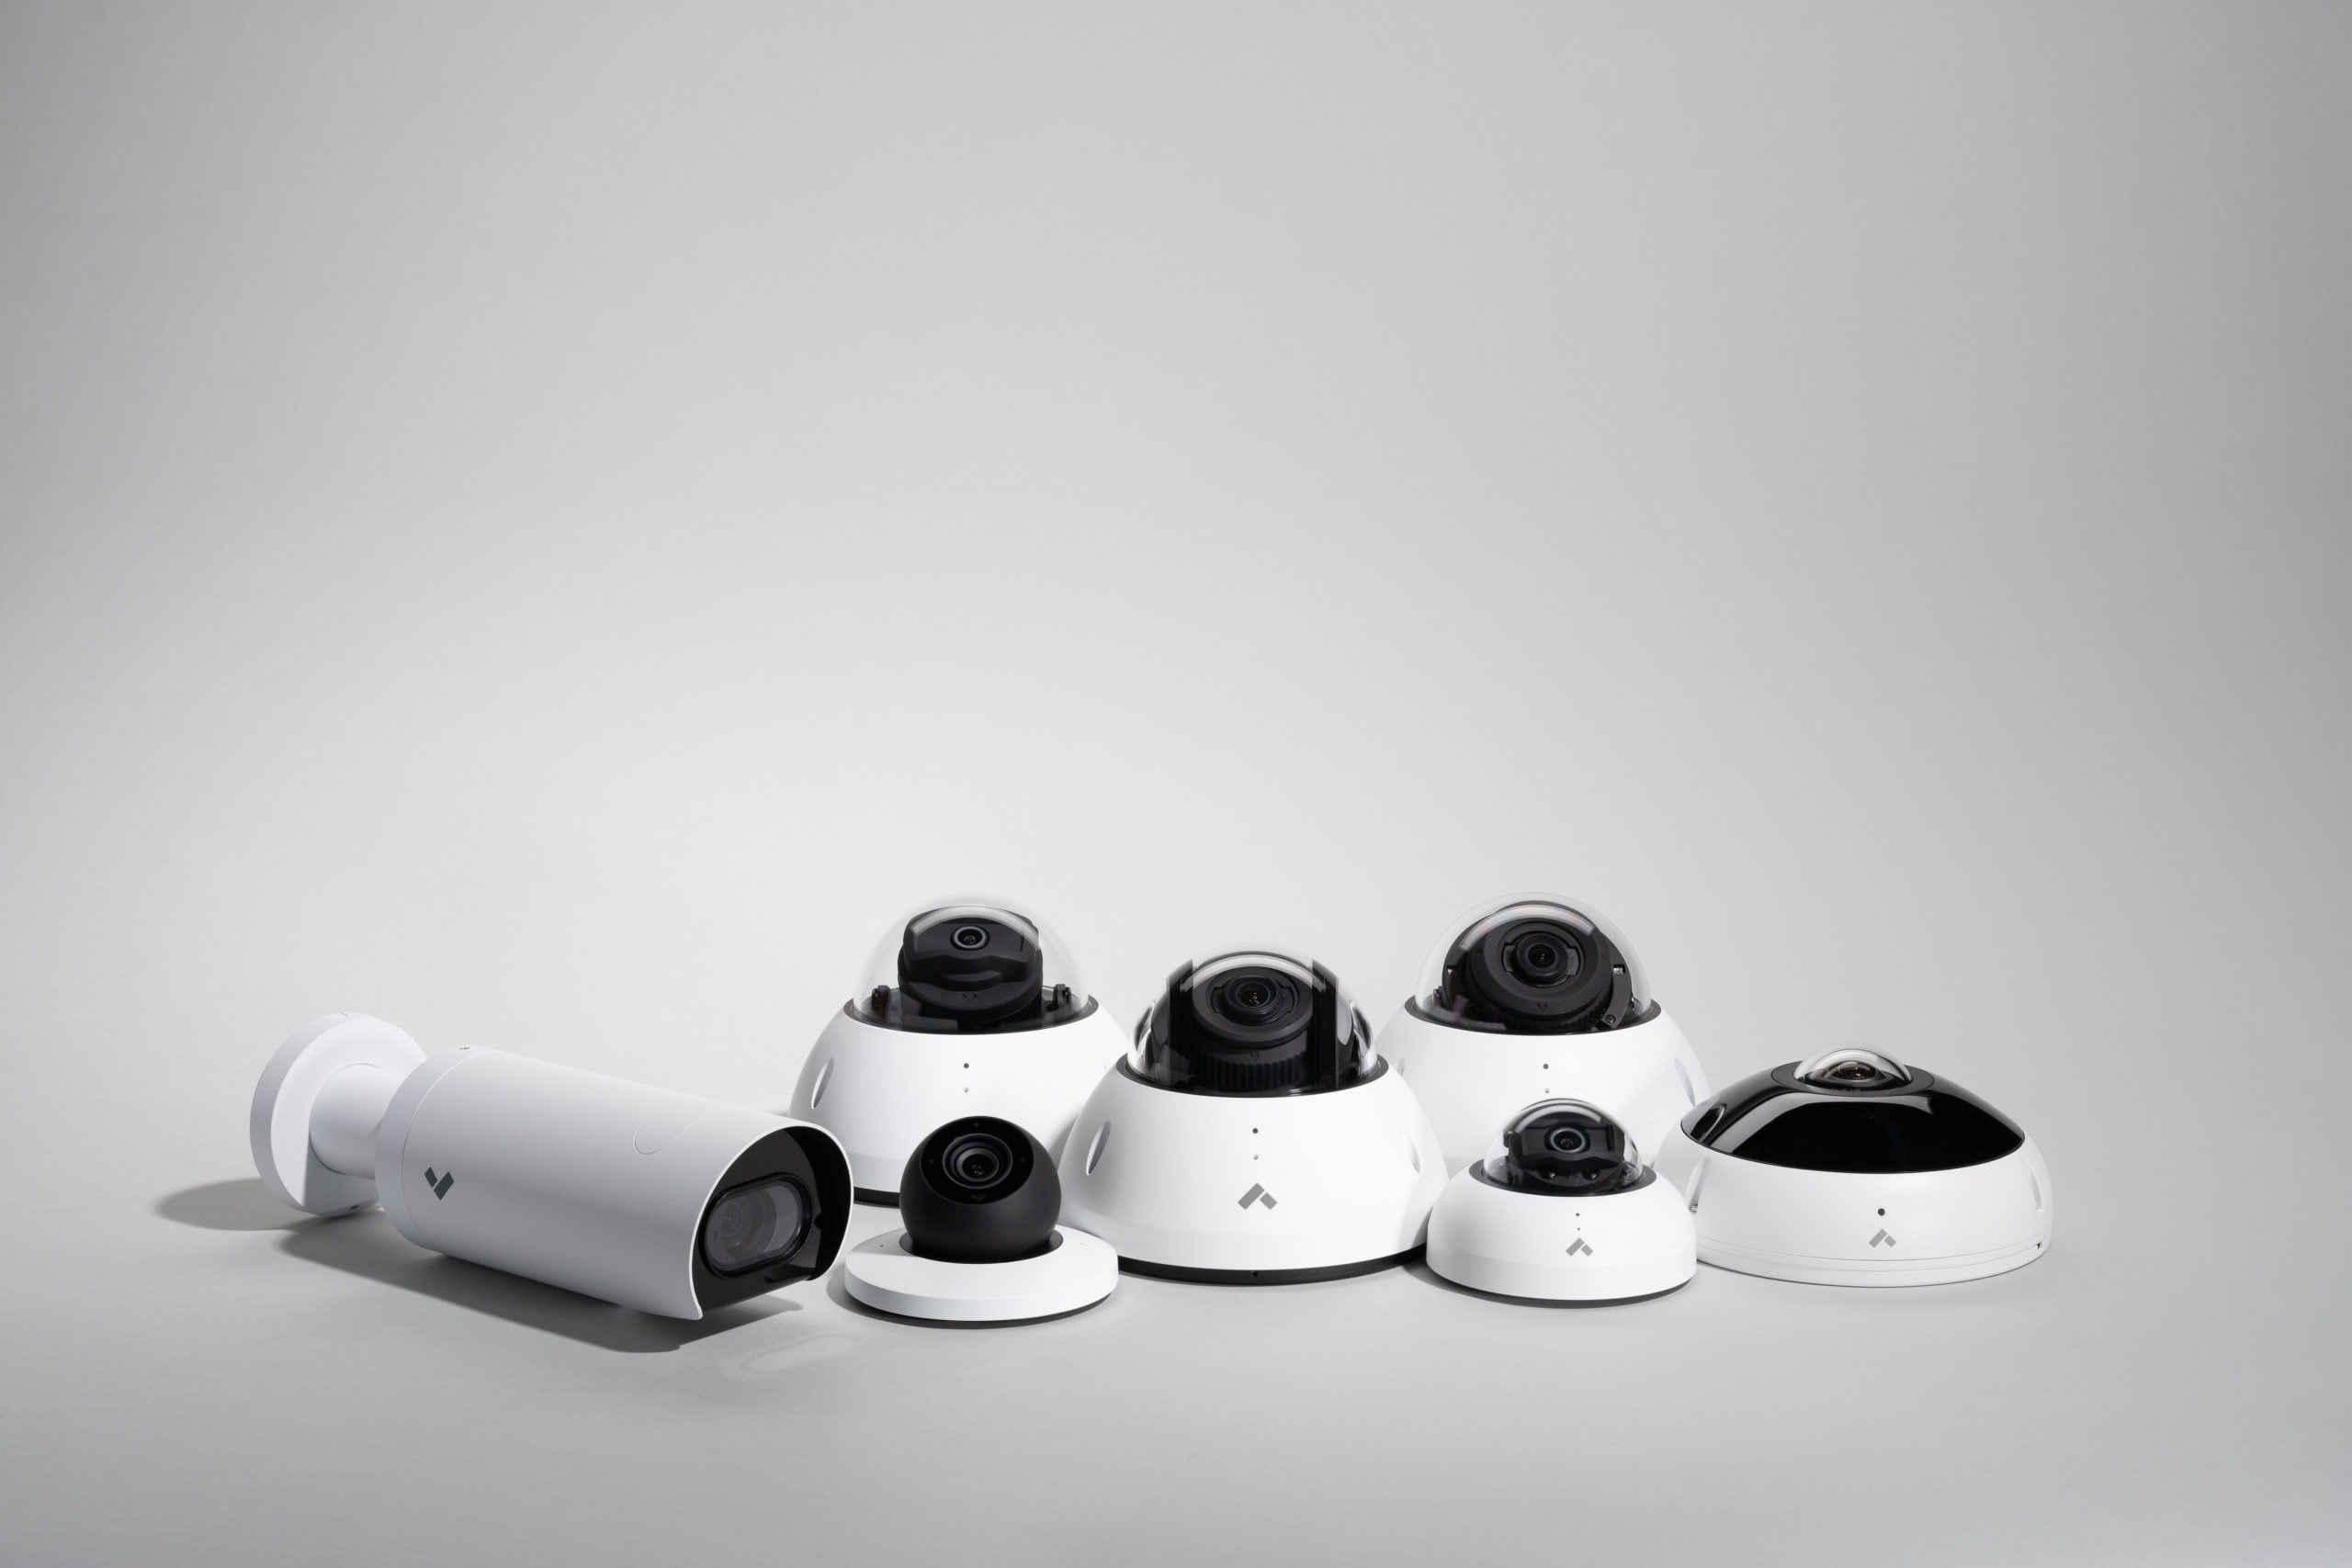 Verkada offers highest resolution security cameras for your property's safety